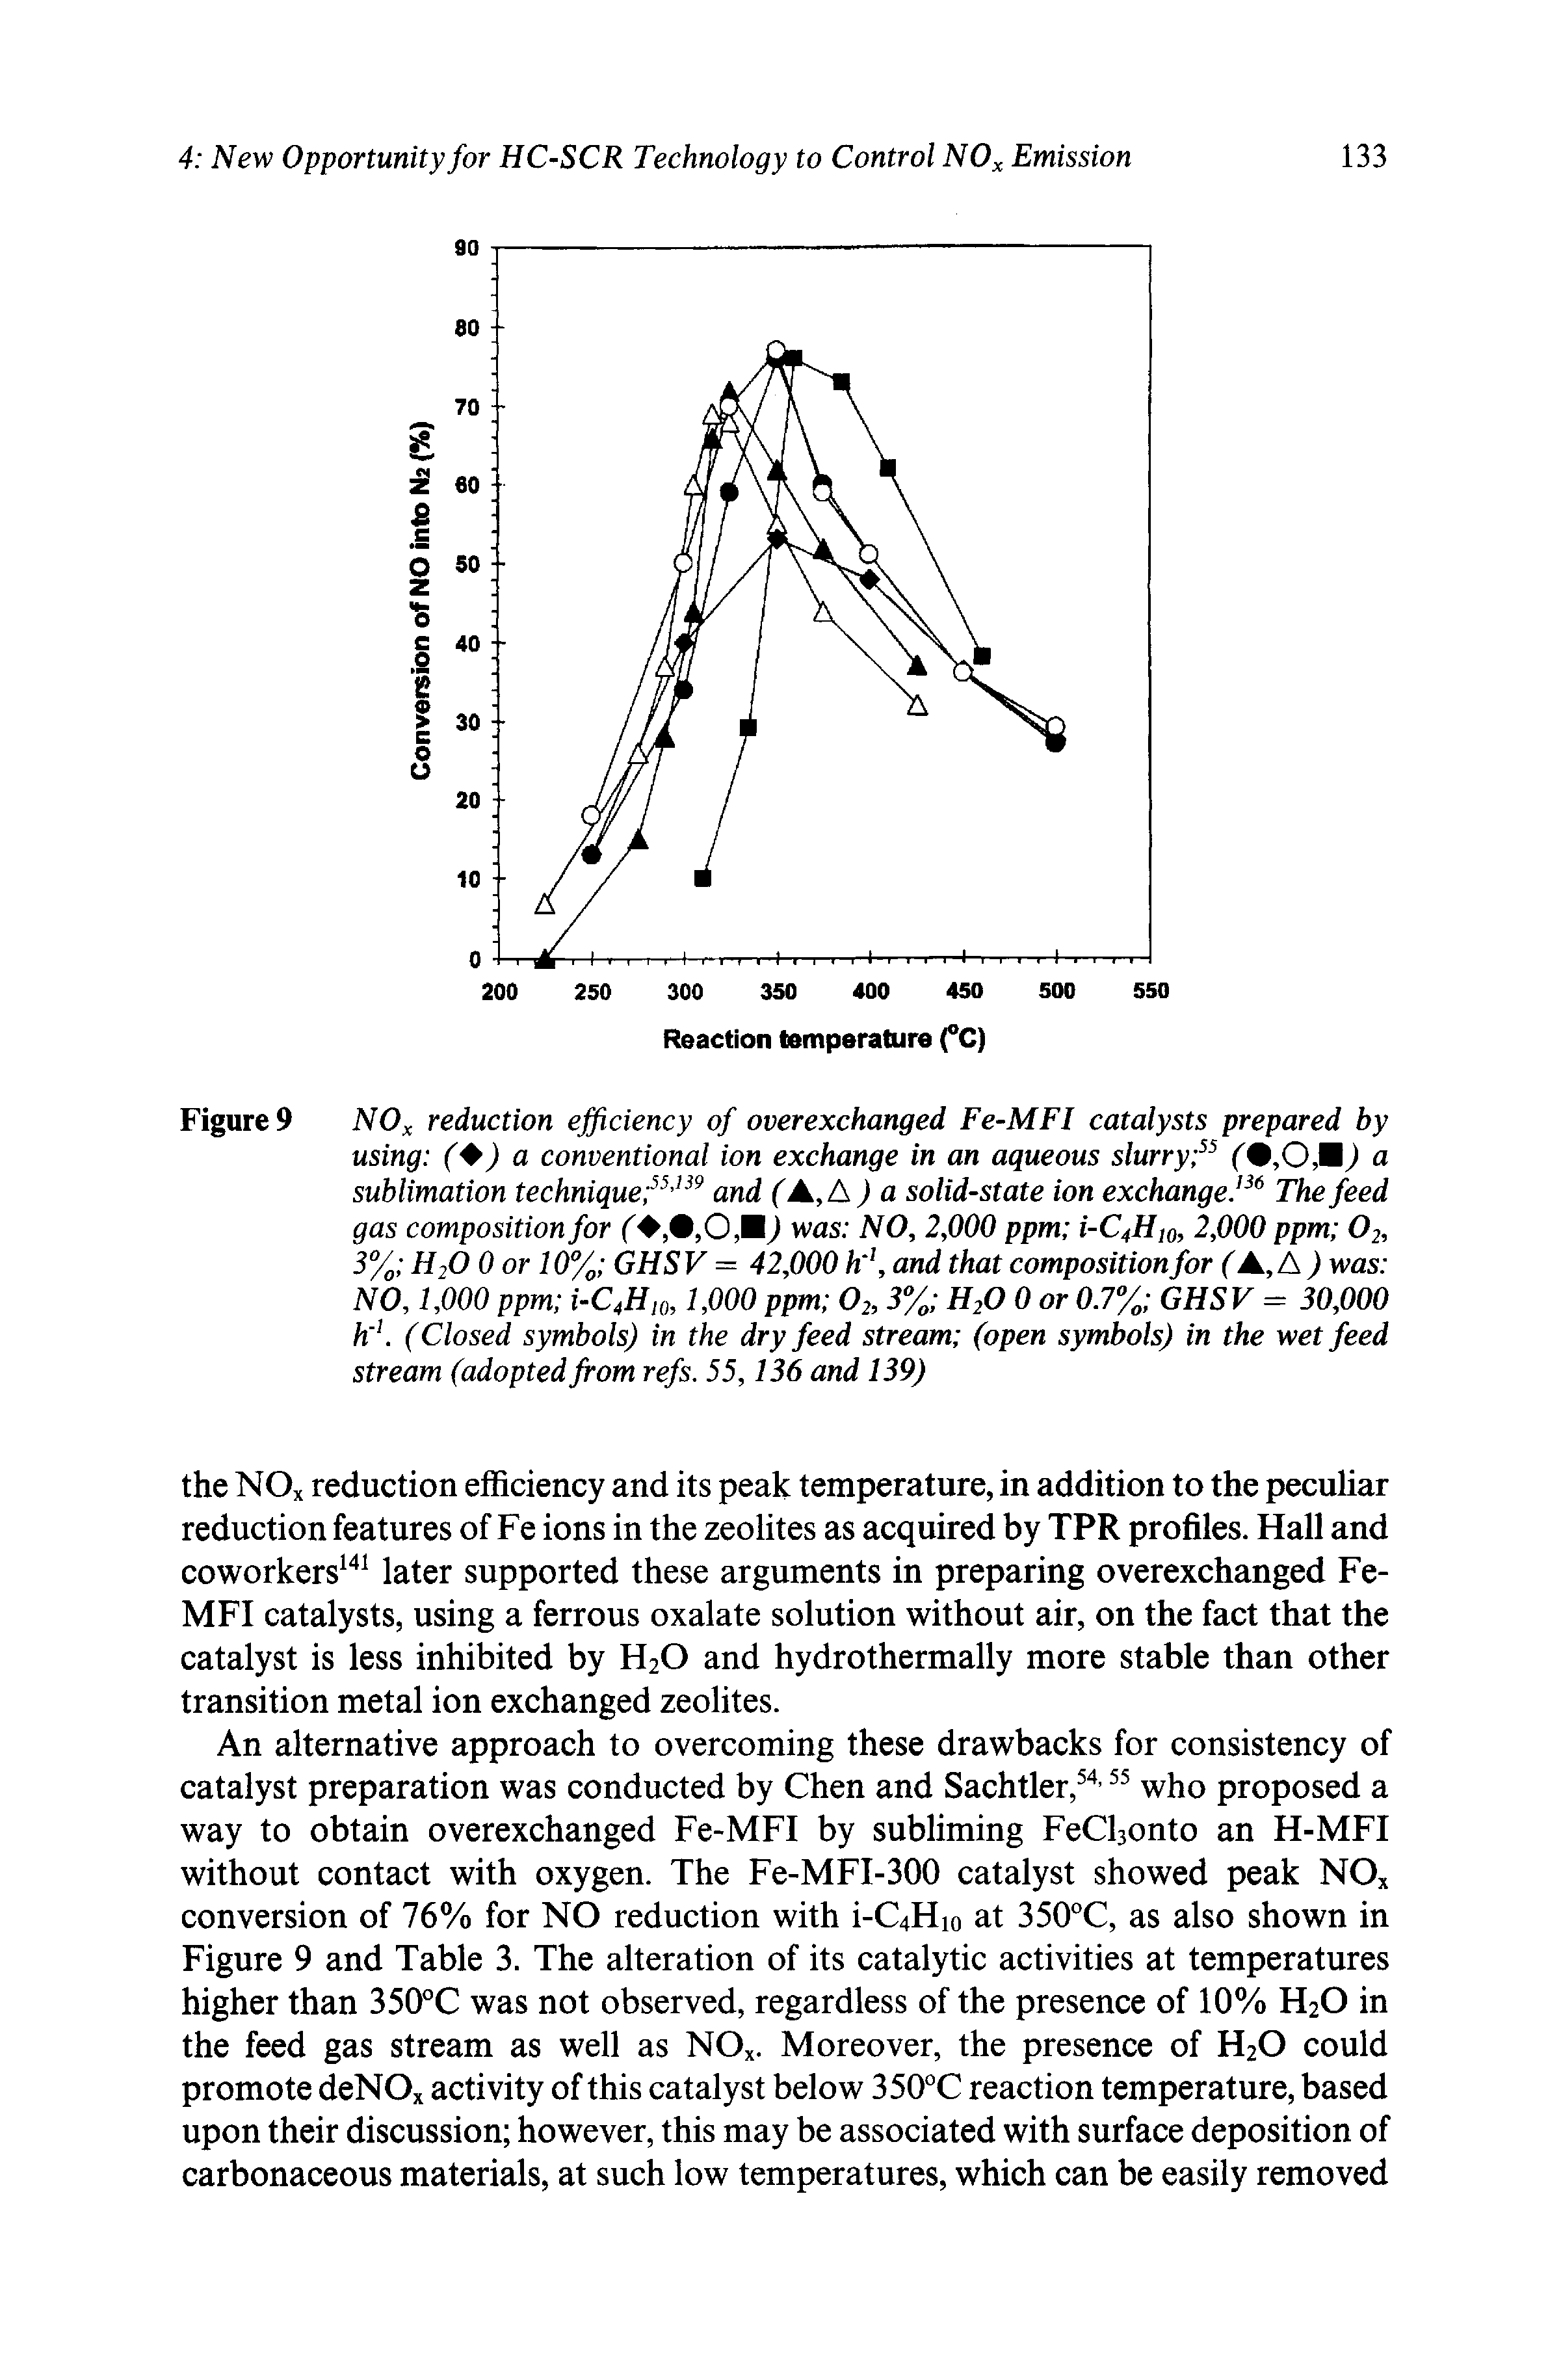 Figure 9 NOx reduction efficiency of overexchanged Fe-MFI catalysts prepared by using ( ) a conventional ion exchange in an aqueous slurry(9,0,M) ci sublimation technique and (A,A) a solid-state ion exchange. The feed gas composition for (A,9,0,M) was NO, 2,000 ppm i-C4Hio, 2,000 ppm O2, 3% H2O 0 or 10% GHSV = 42,000 k, and that composition for (A, A) was NO, 1,000 ppm i-C Hu), 1,000 ppm O2,3% H2O 0 or 0.7% GHSV = 30,000 k. (Closed symbols) in the dry feed stream (open symbols) in the wet feed stream (adopted from refs. 55,136 and 139)...